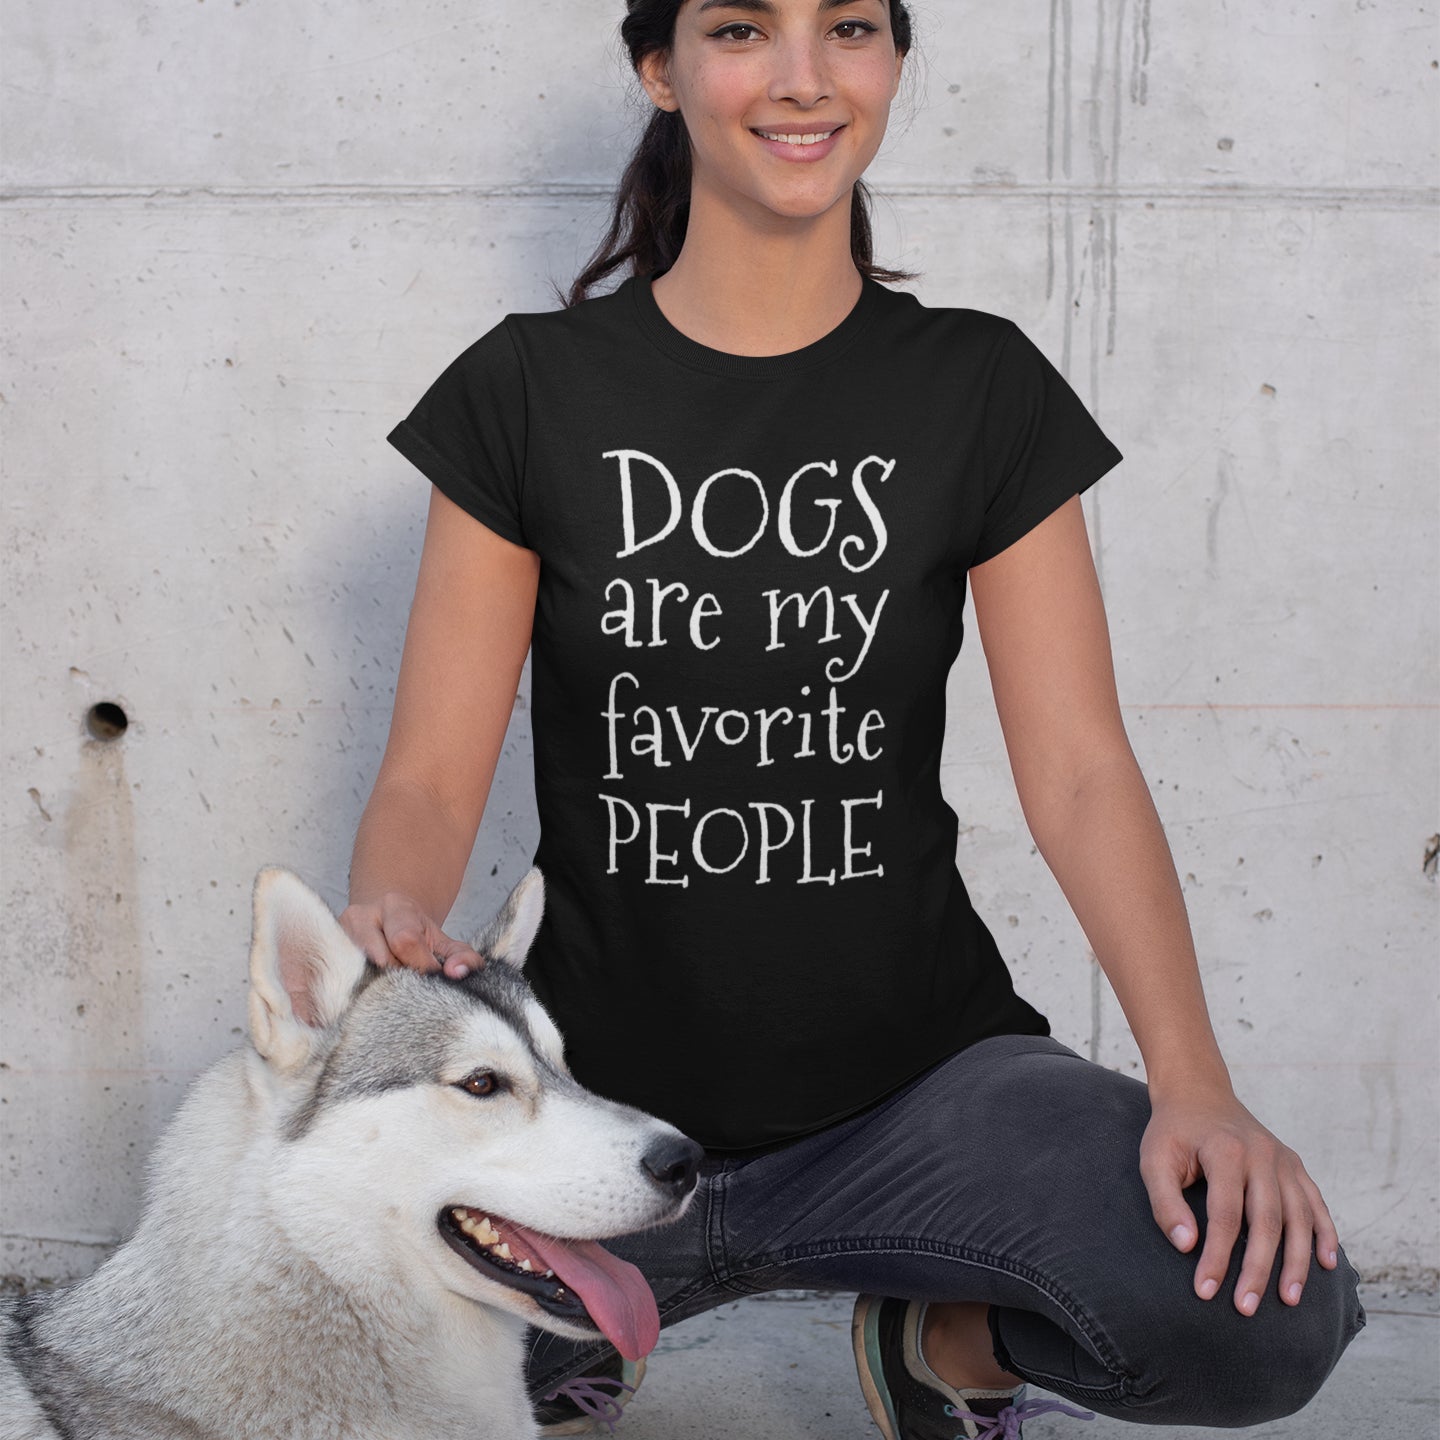 dogs are my favorite people t shirt